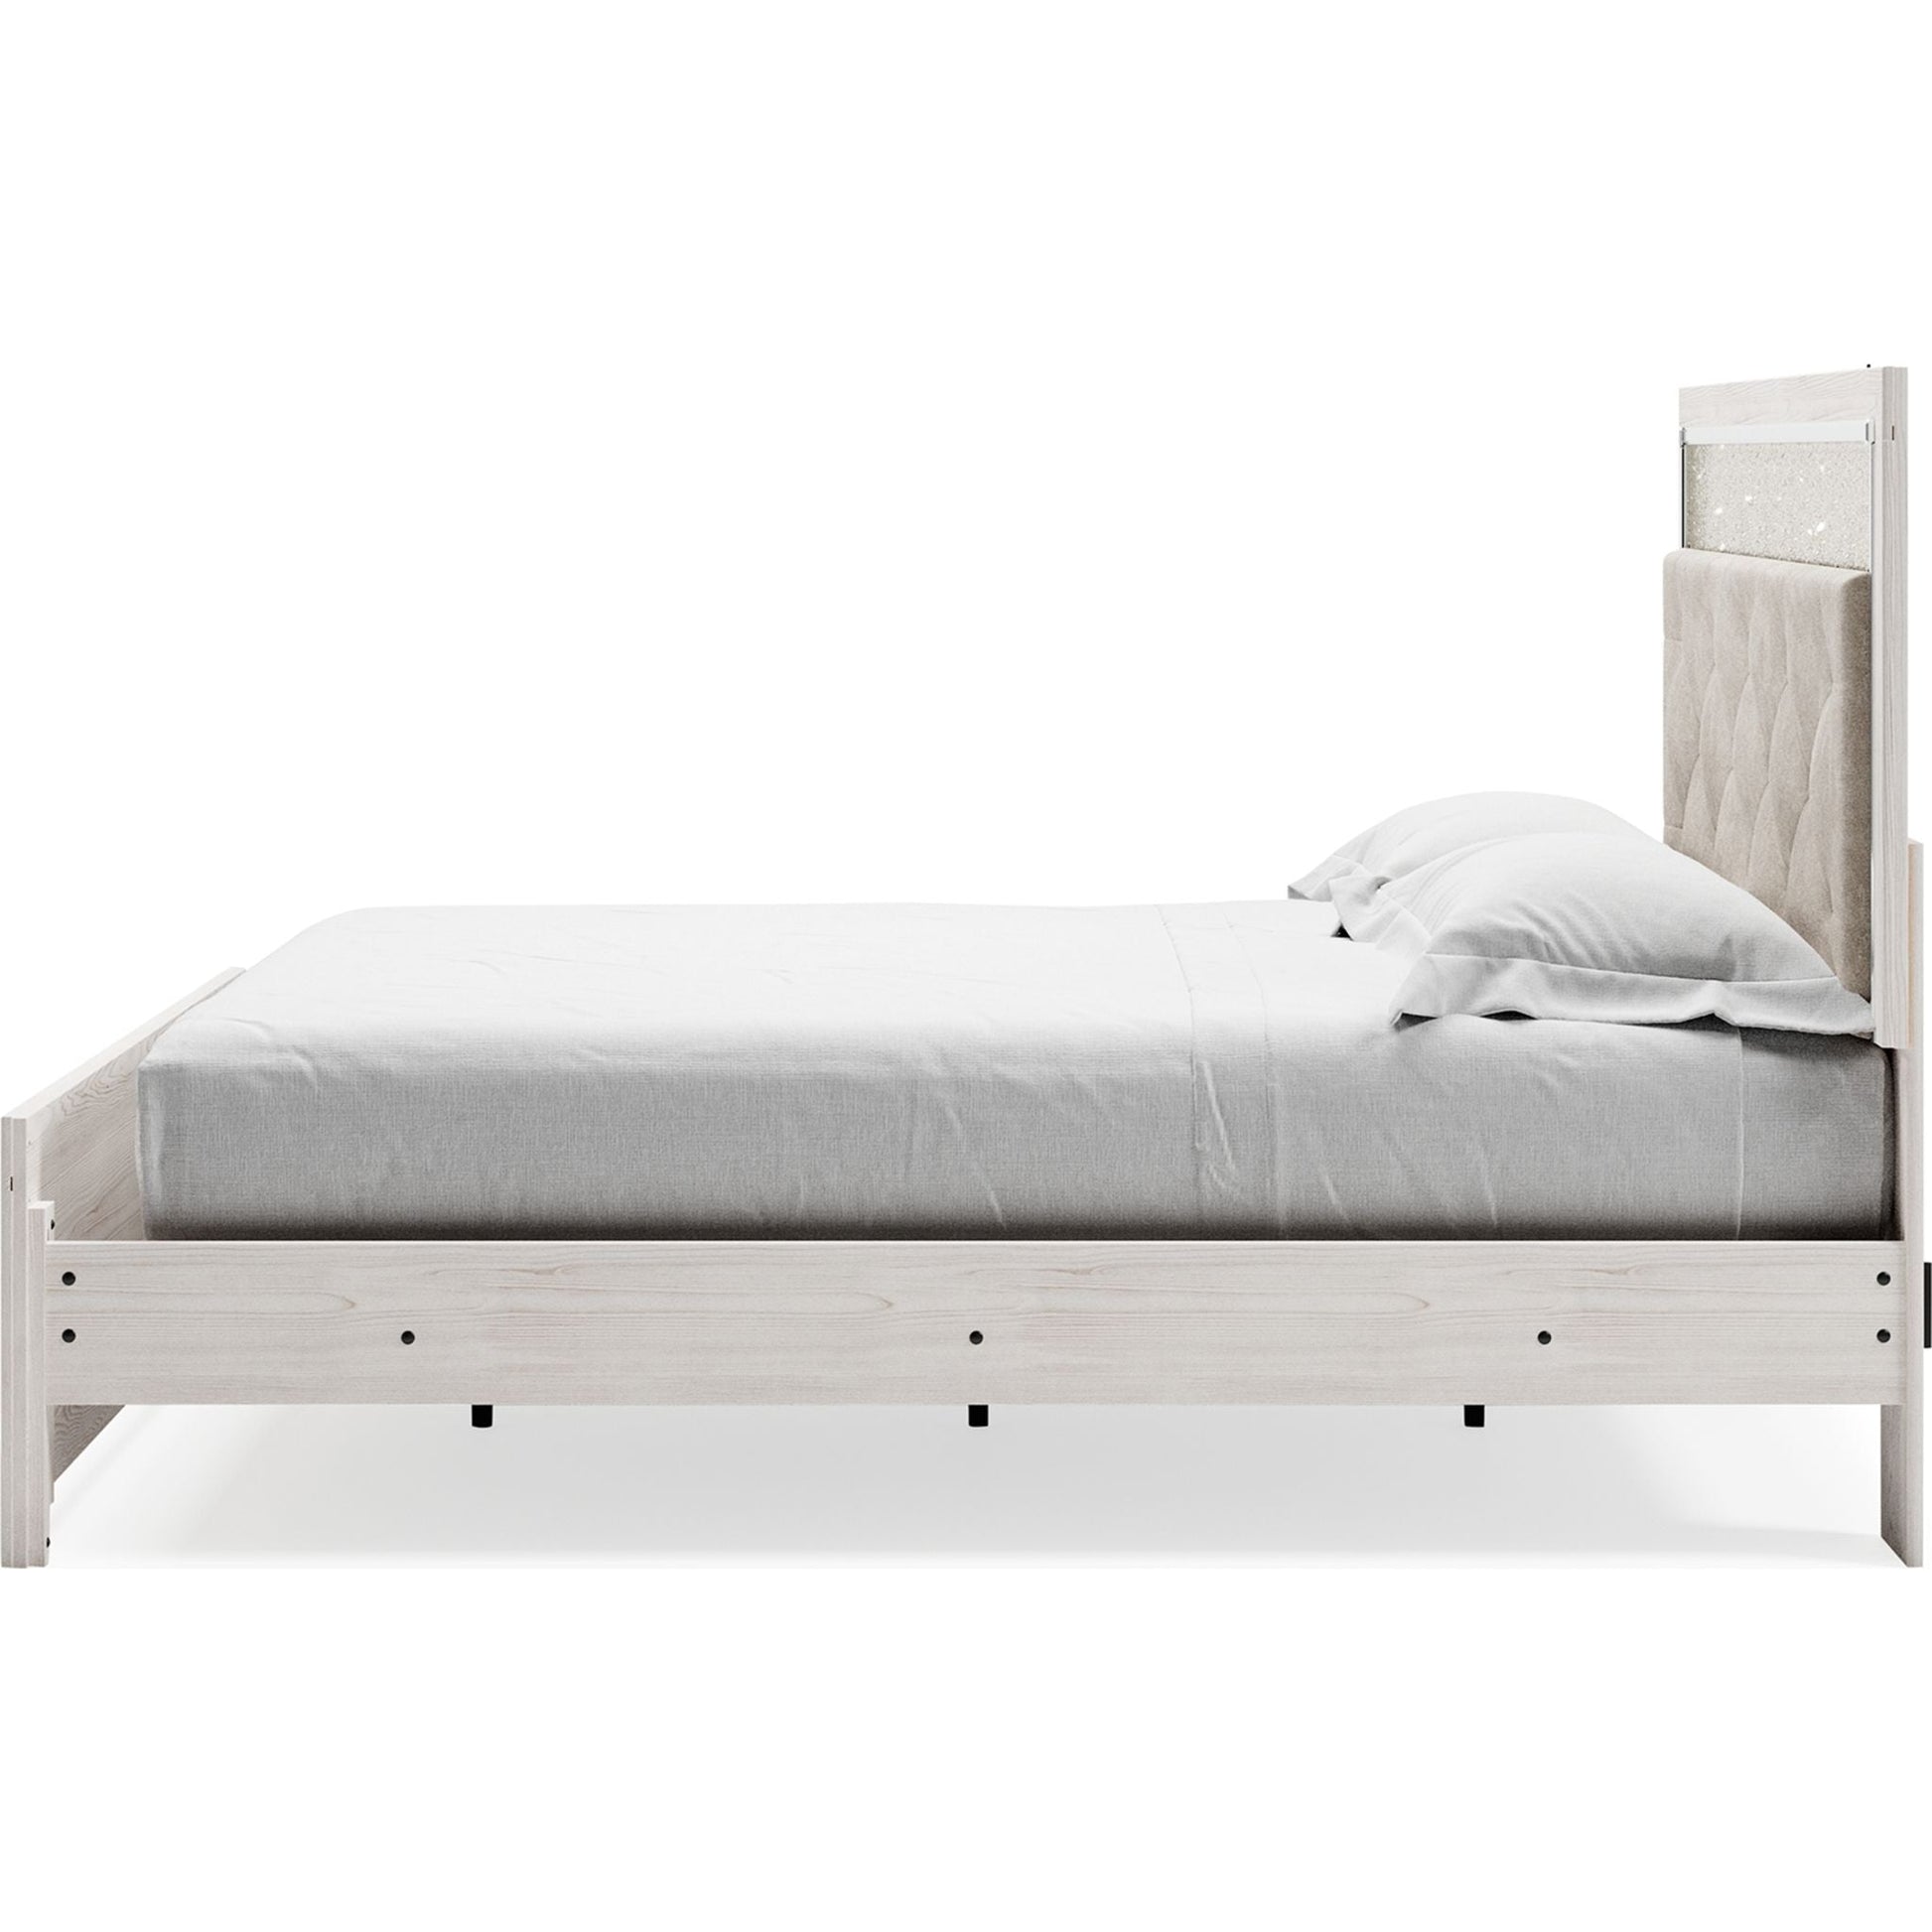 Altyra 3 Piece Panel Bed - White